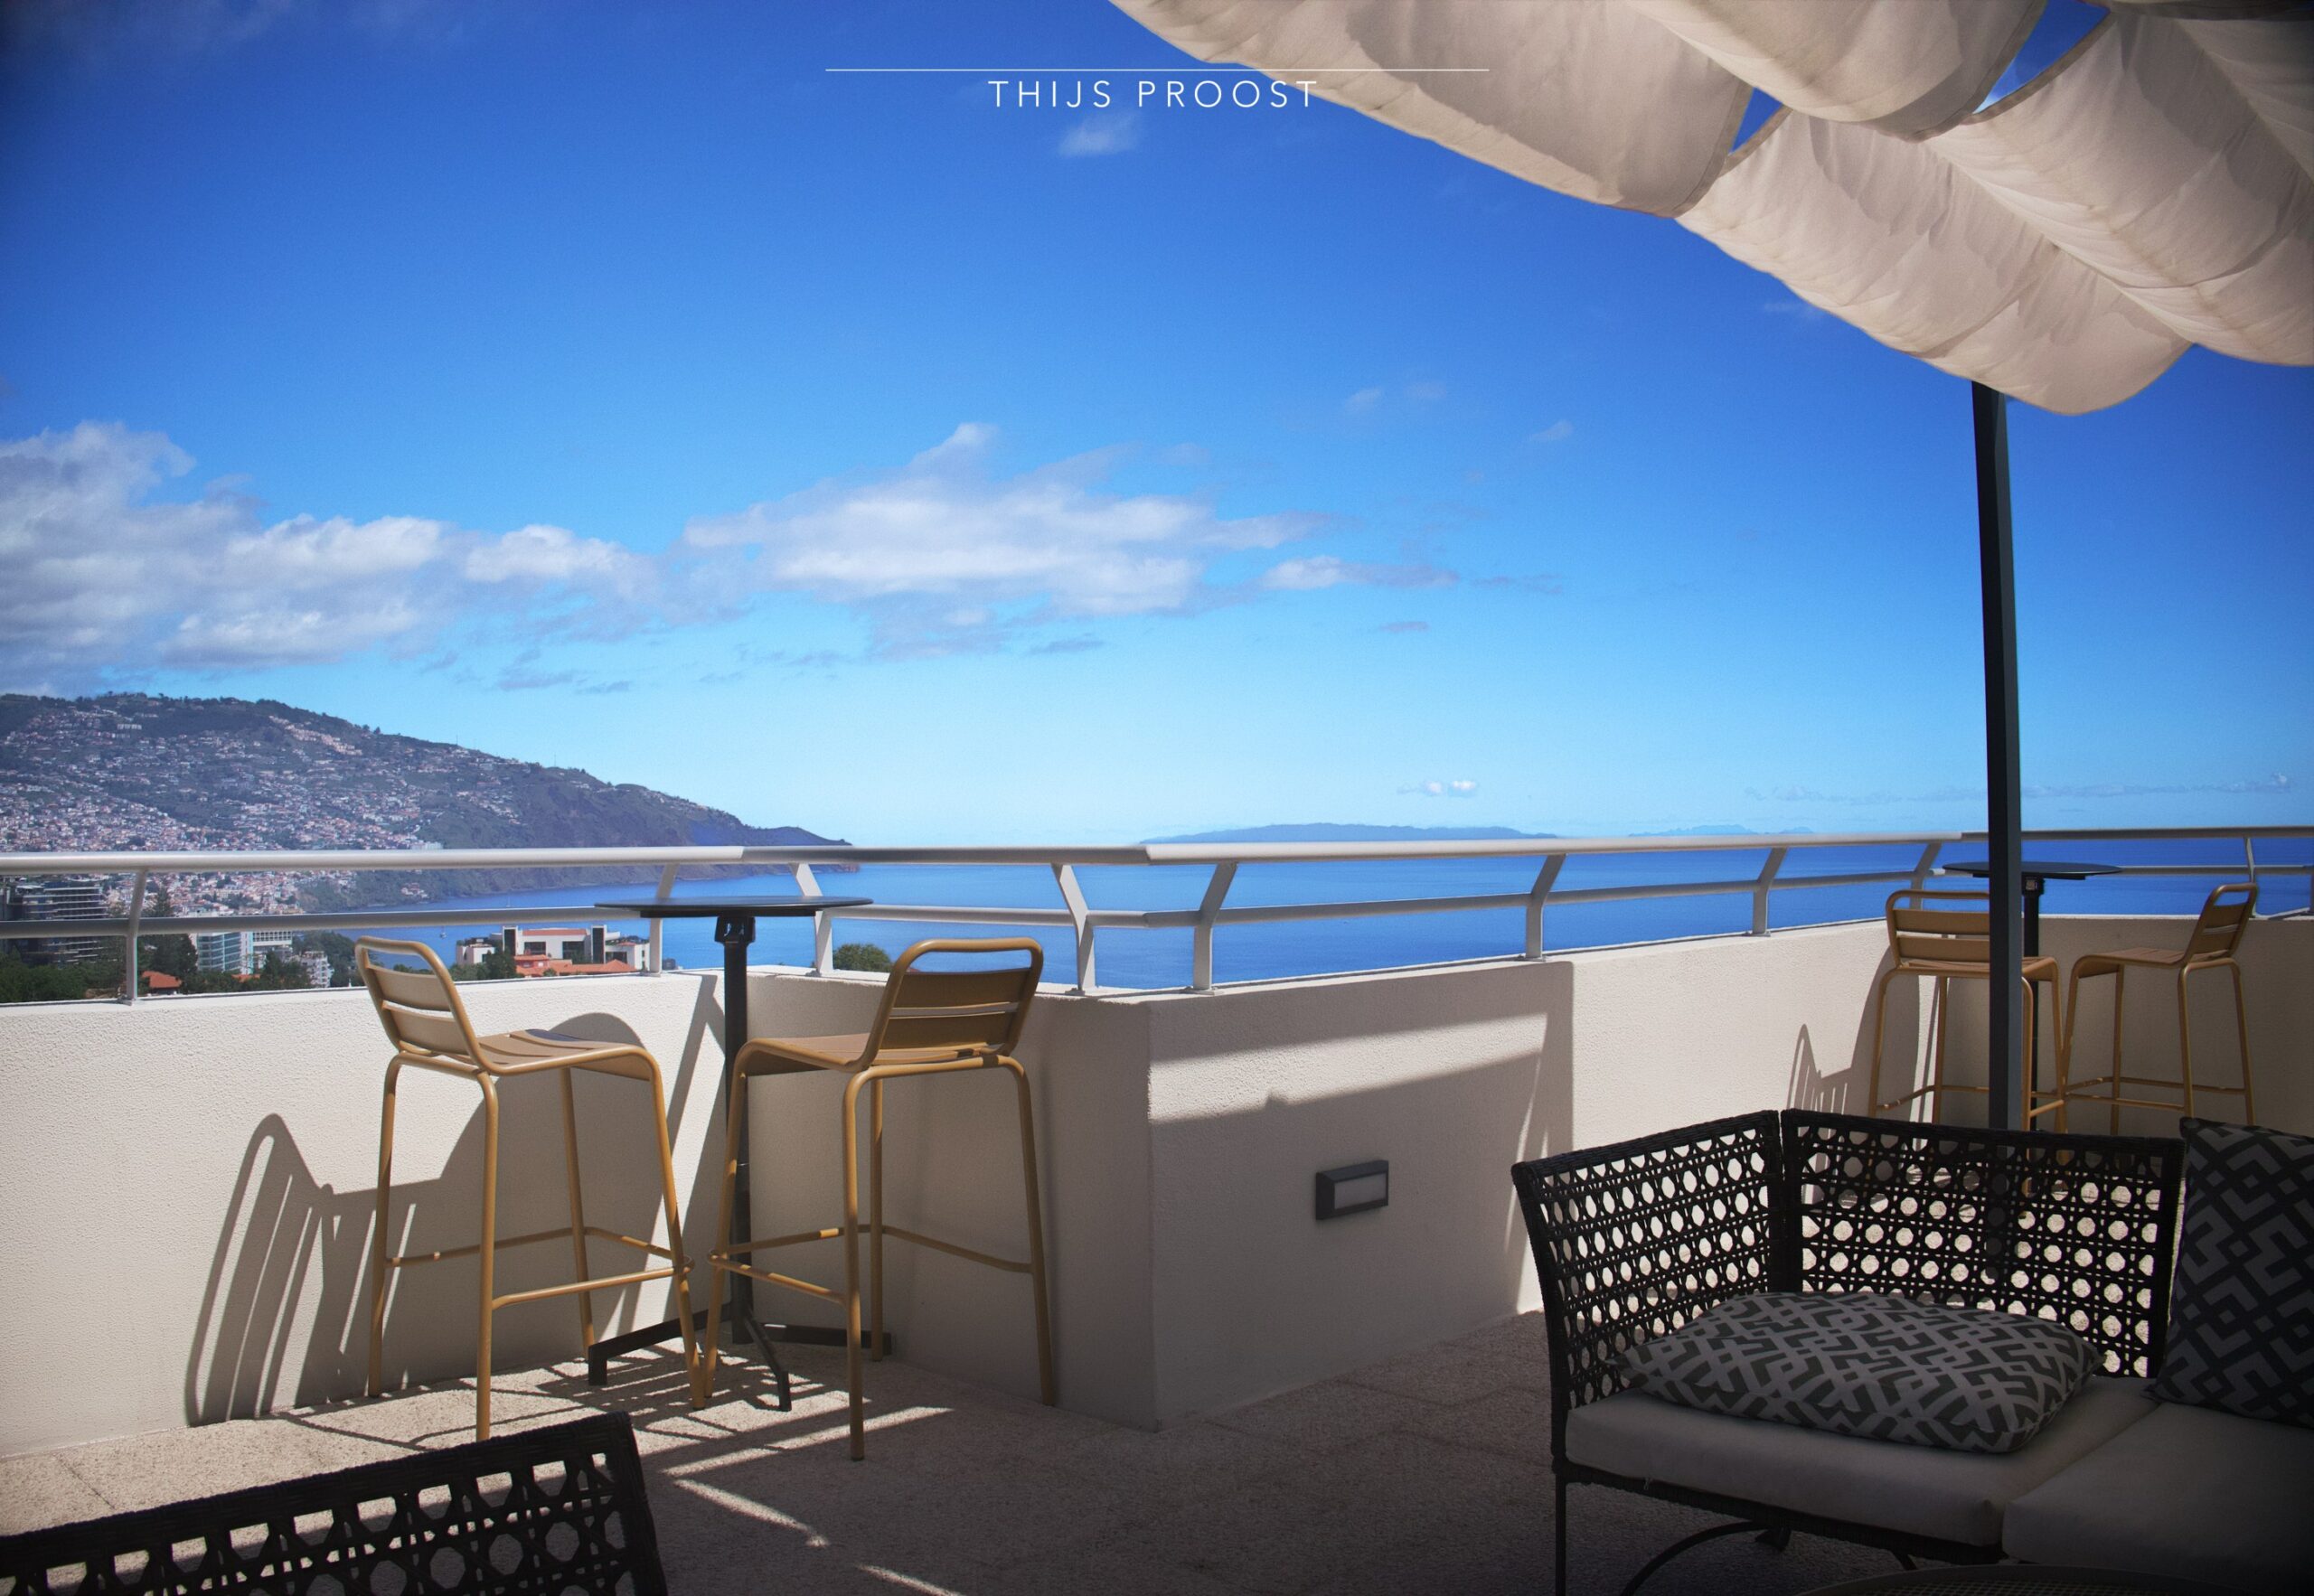 View on top of a roof terrace in Funchal Madeira. Seats are in the forgrond. The ocean in the background is blue as well ax the sky. At the left you can see part of the city of Funchal.